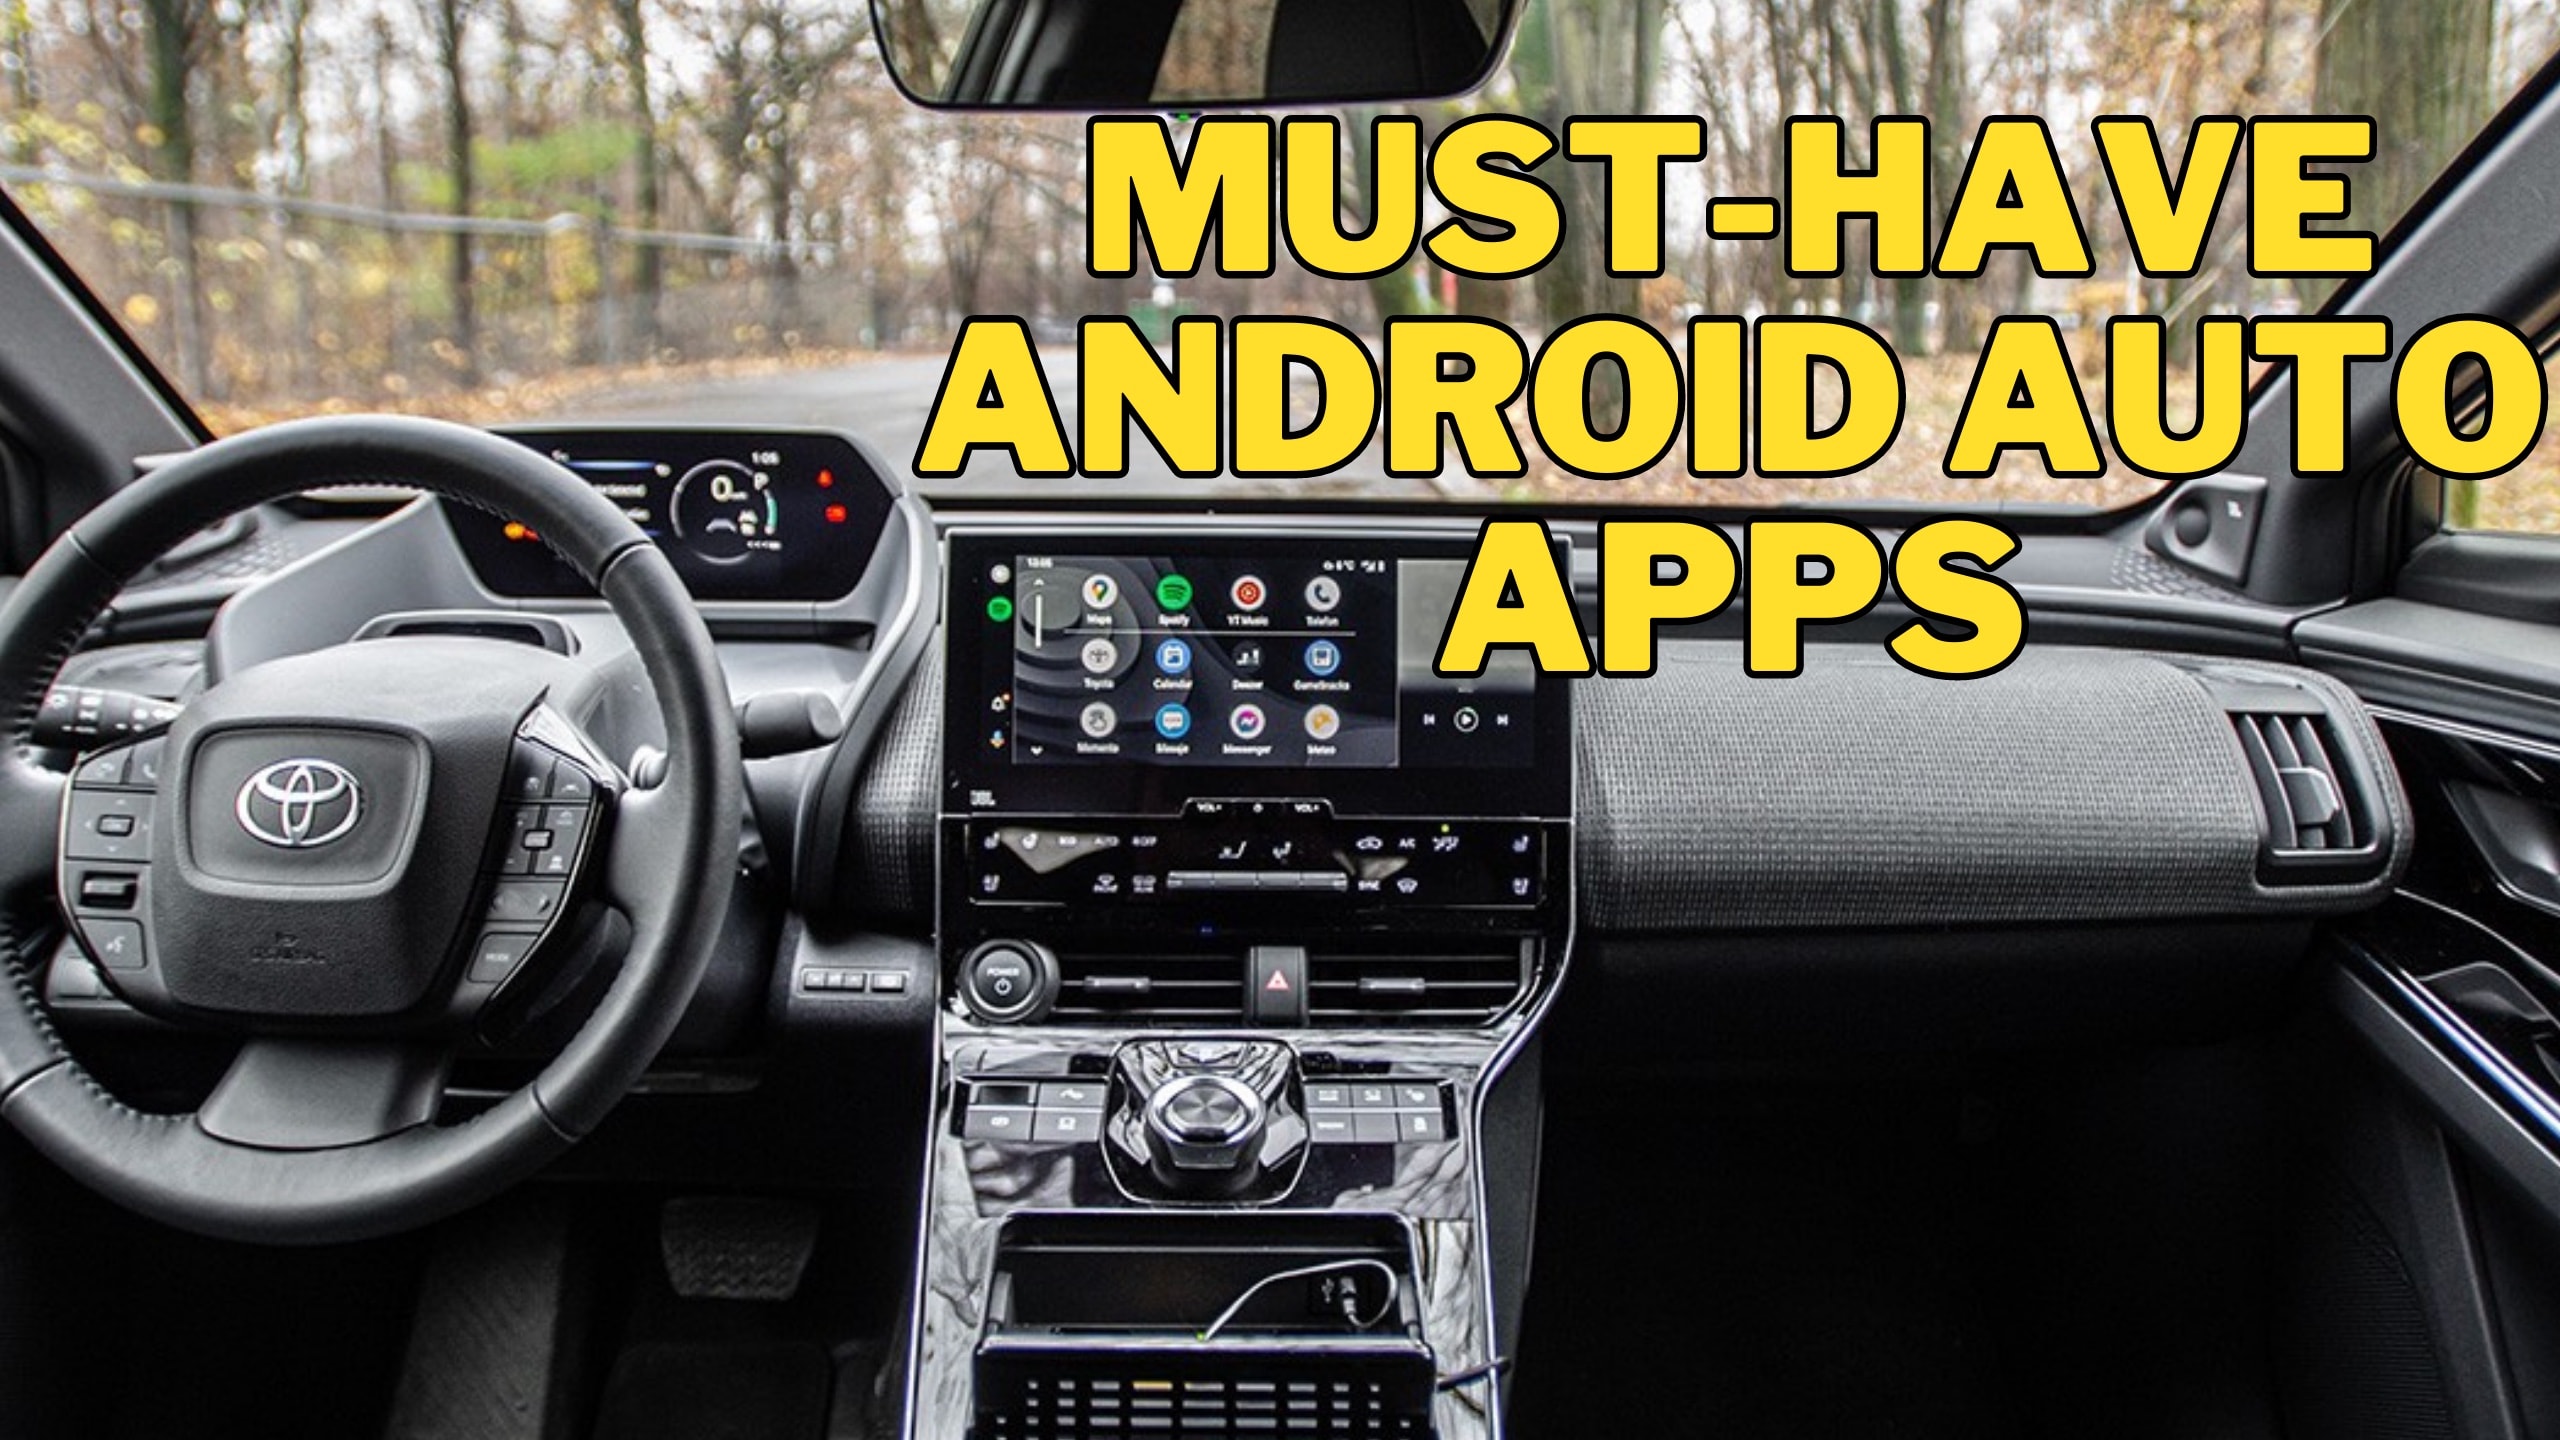 https://s1.cdn.autoevolution.com/images/news/5-must-have-android-auto-apps-everybody-must-download-right-now-215339_1.jpg